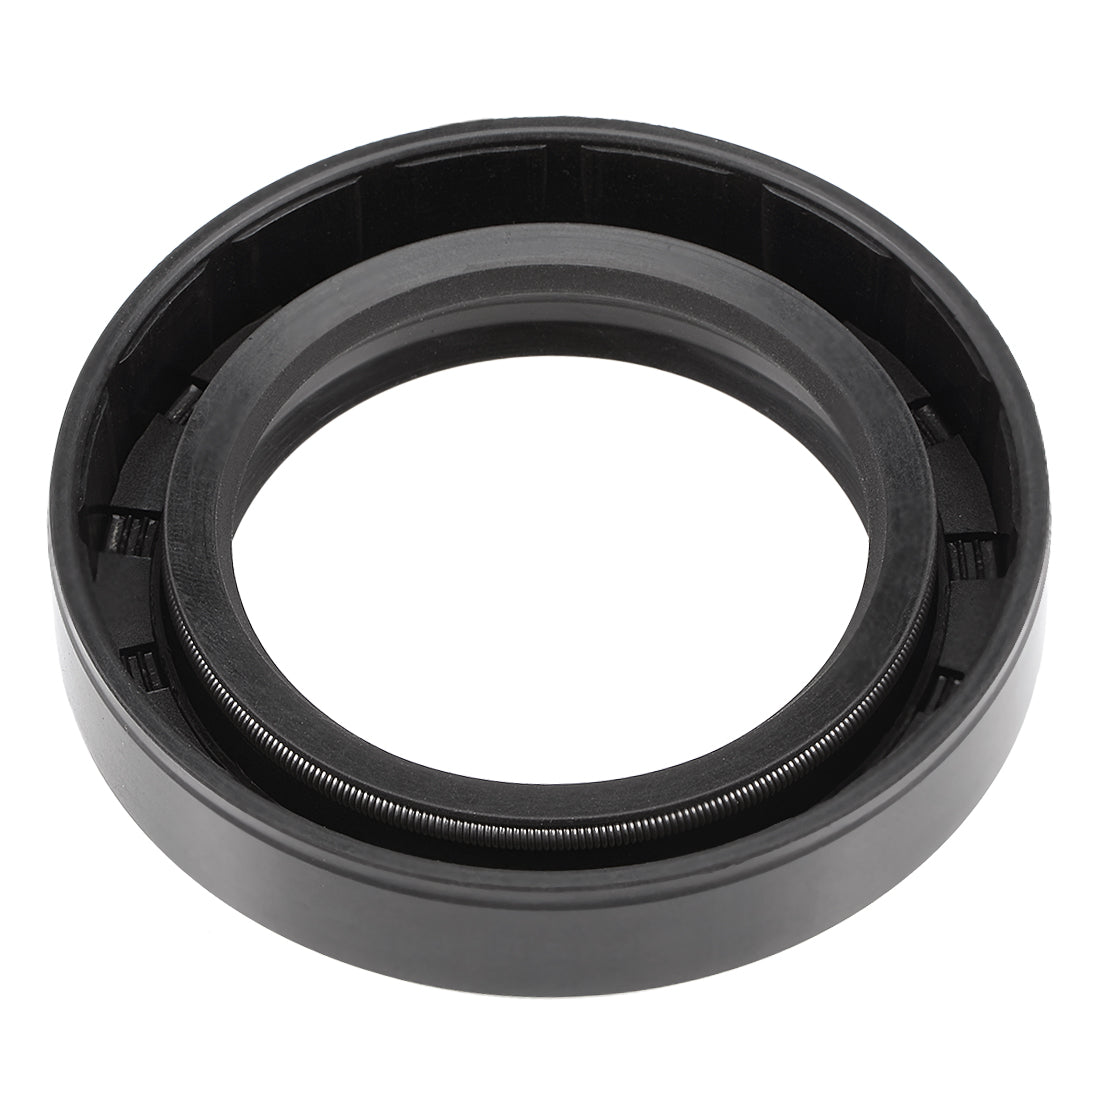 Uxcell Uxcell Oil Seal, TC 50mm x 80mm x 12mm, Nitrile Rubber Cover Double Lip